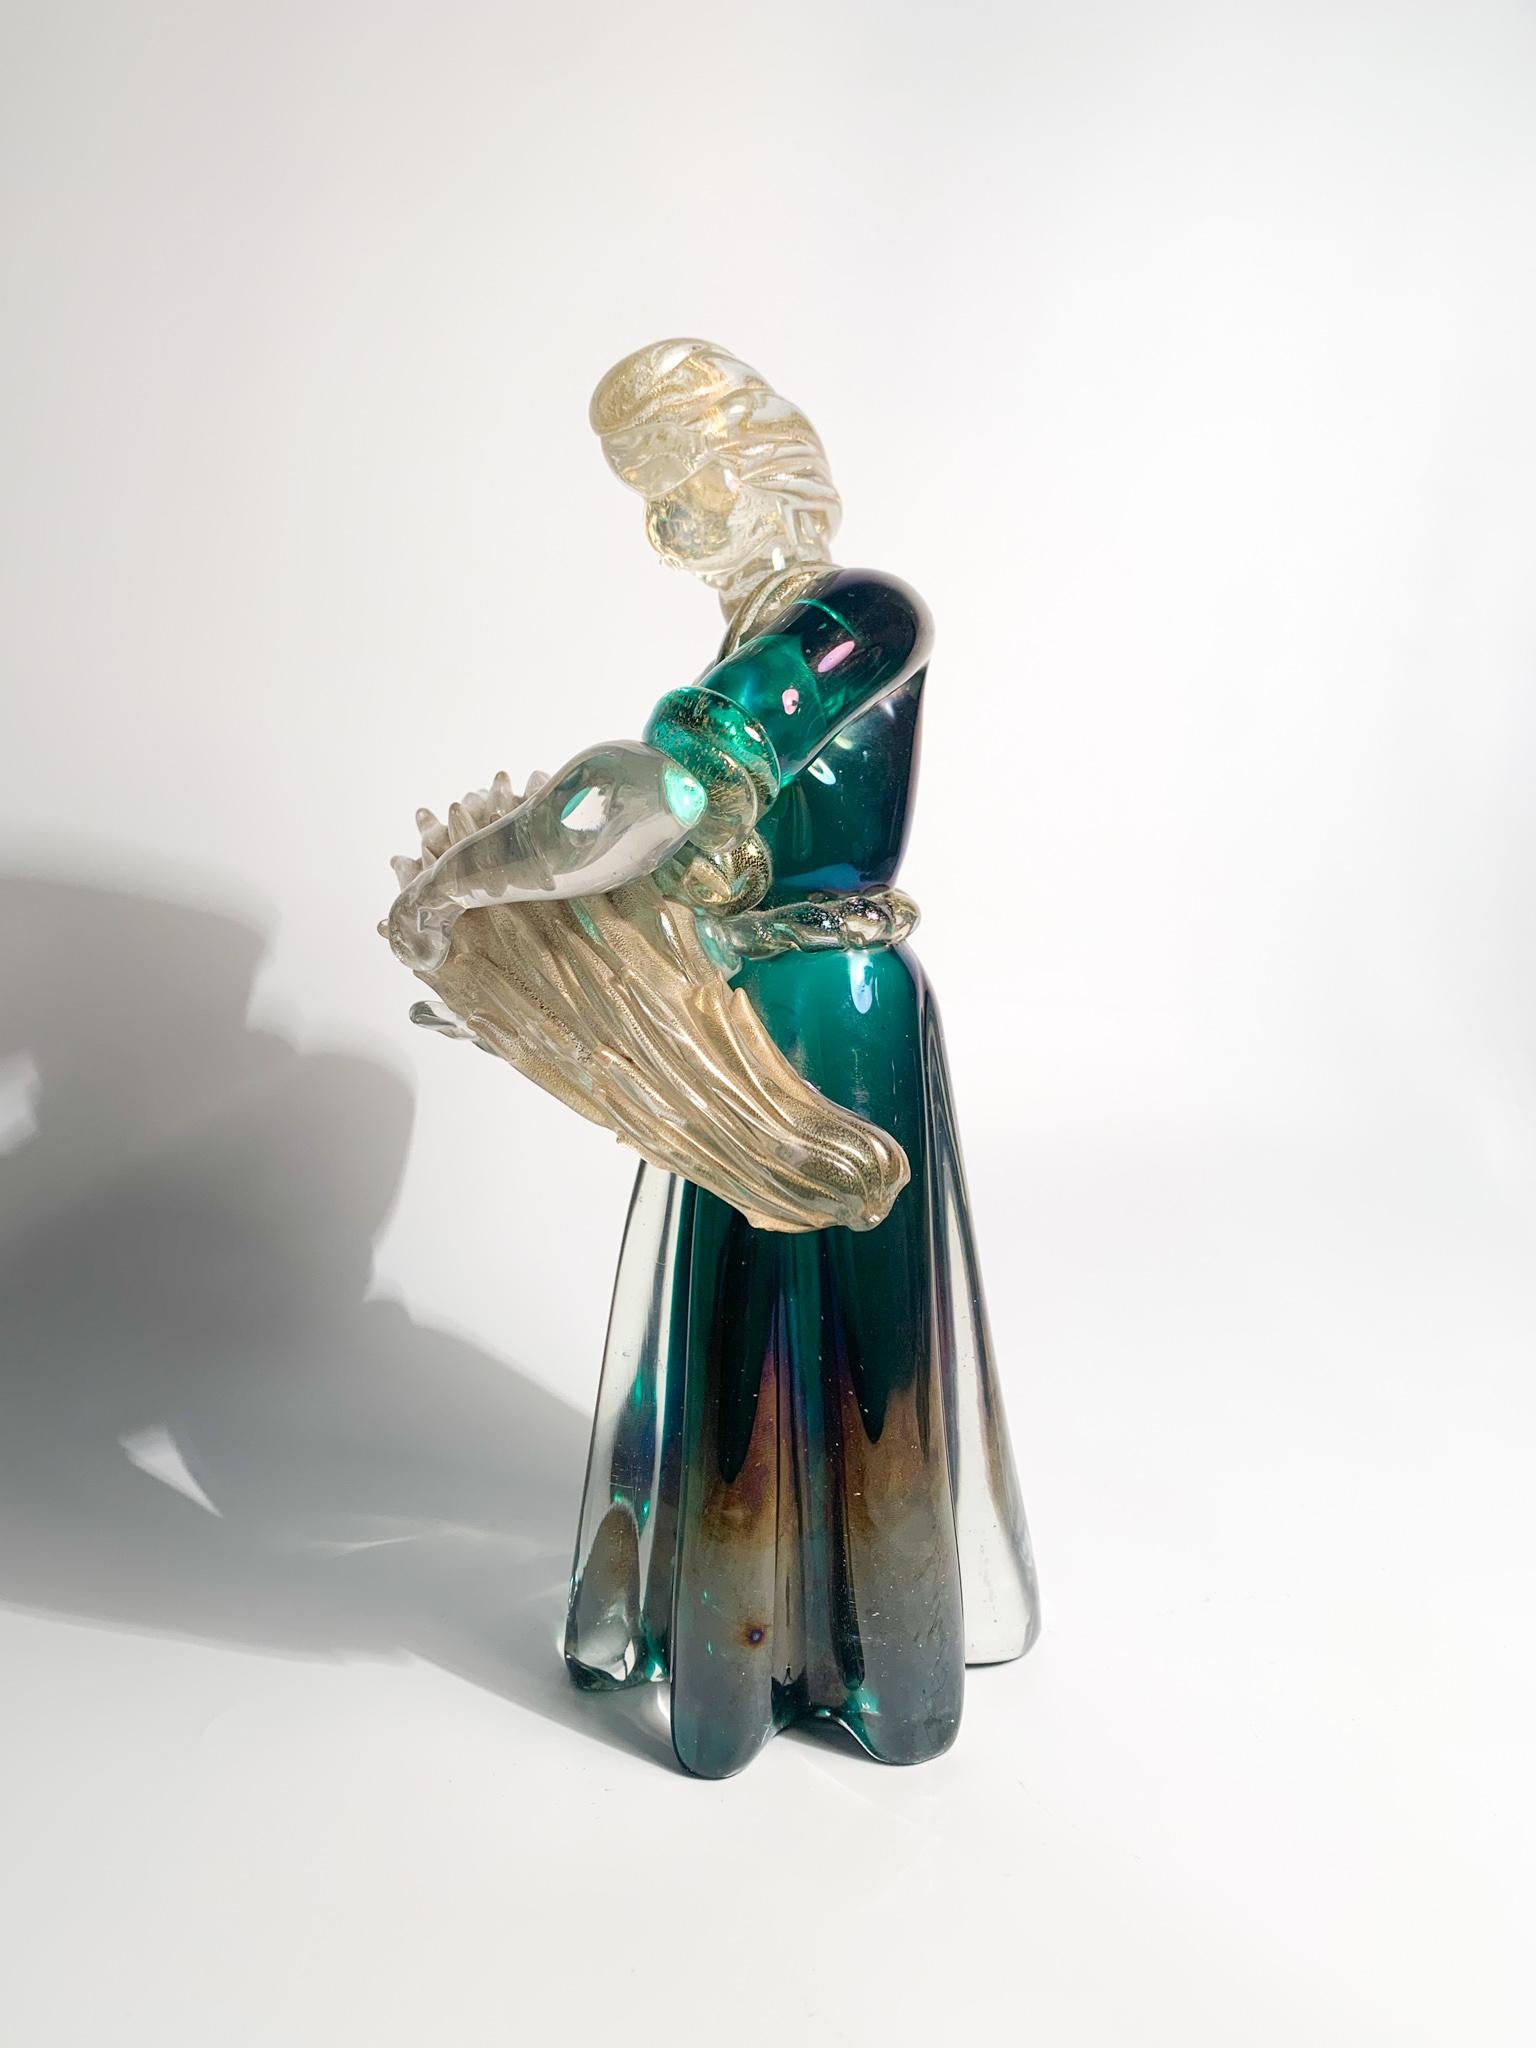 Iridescent Murano Glass Sculpture with Gold Leaves by Archimede Seguso 1940s For Sale 6